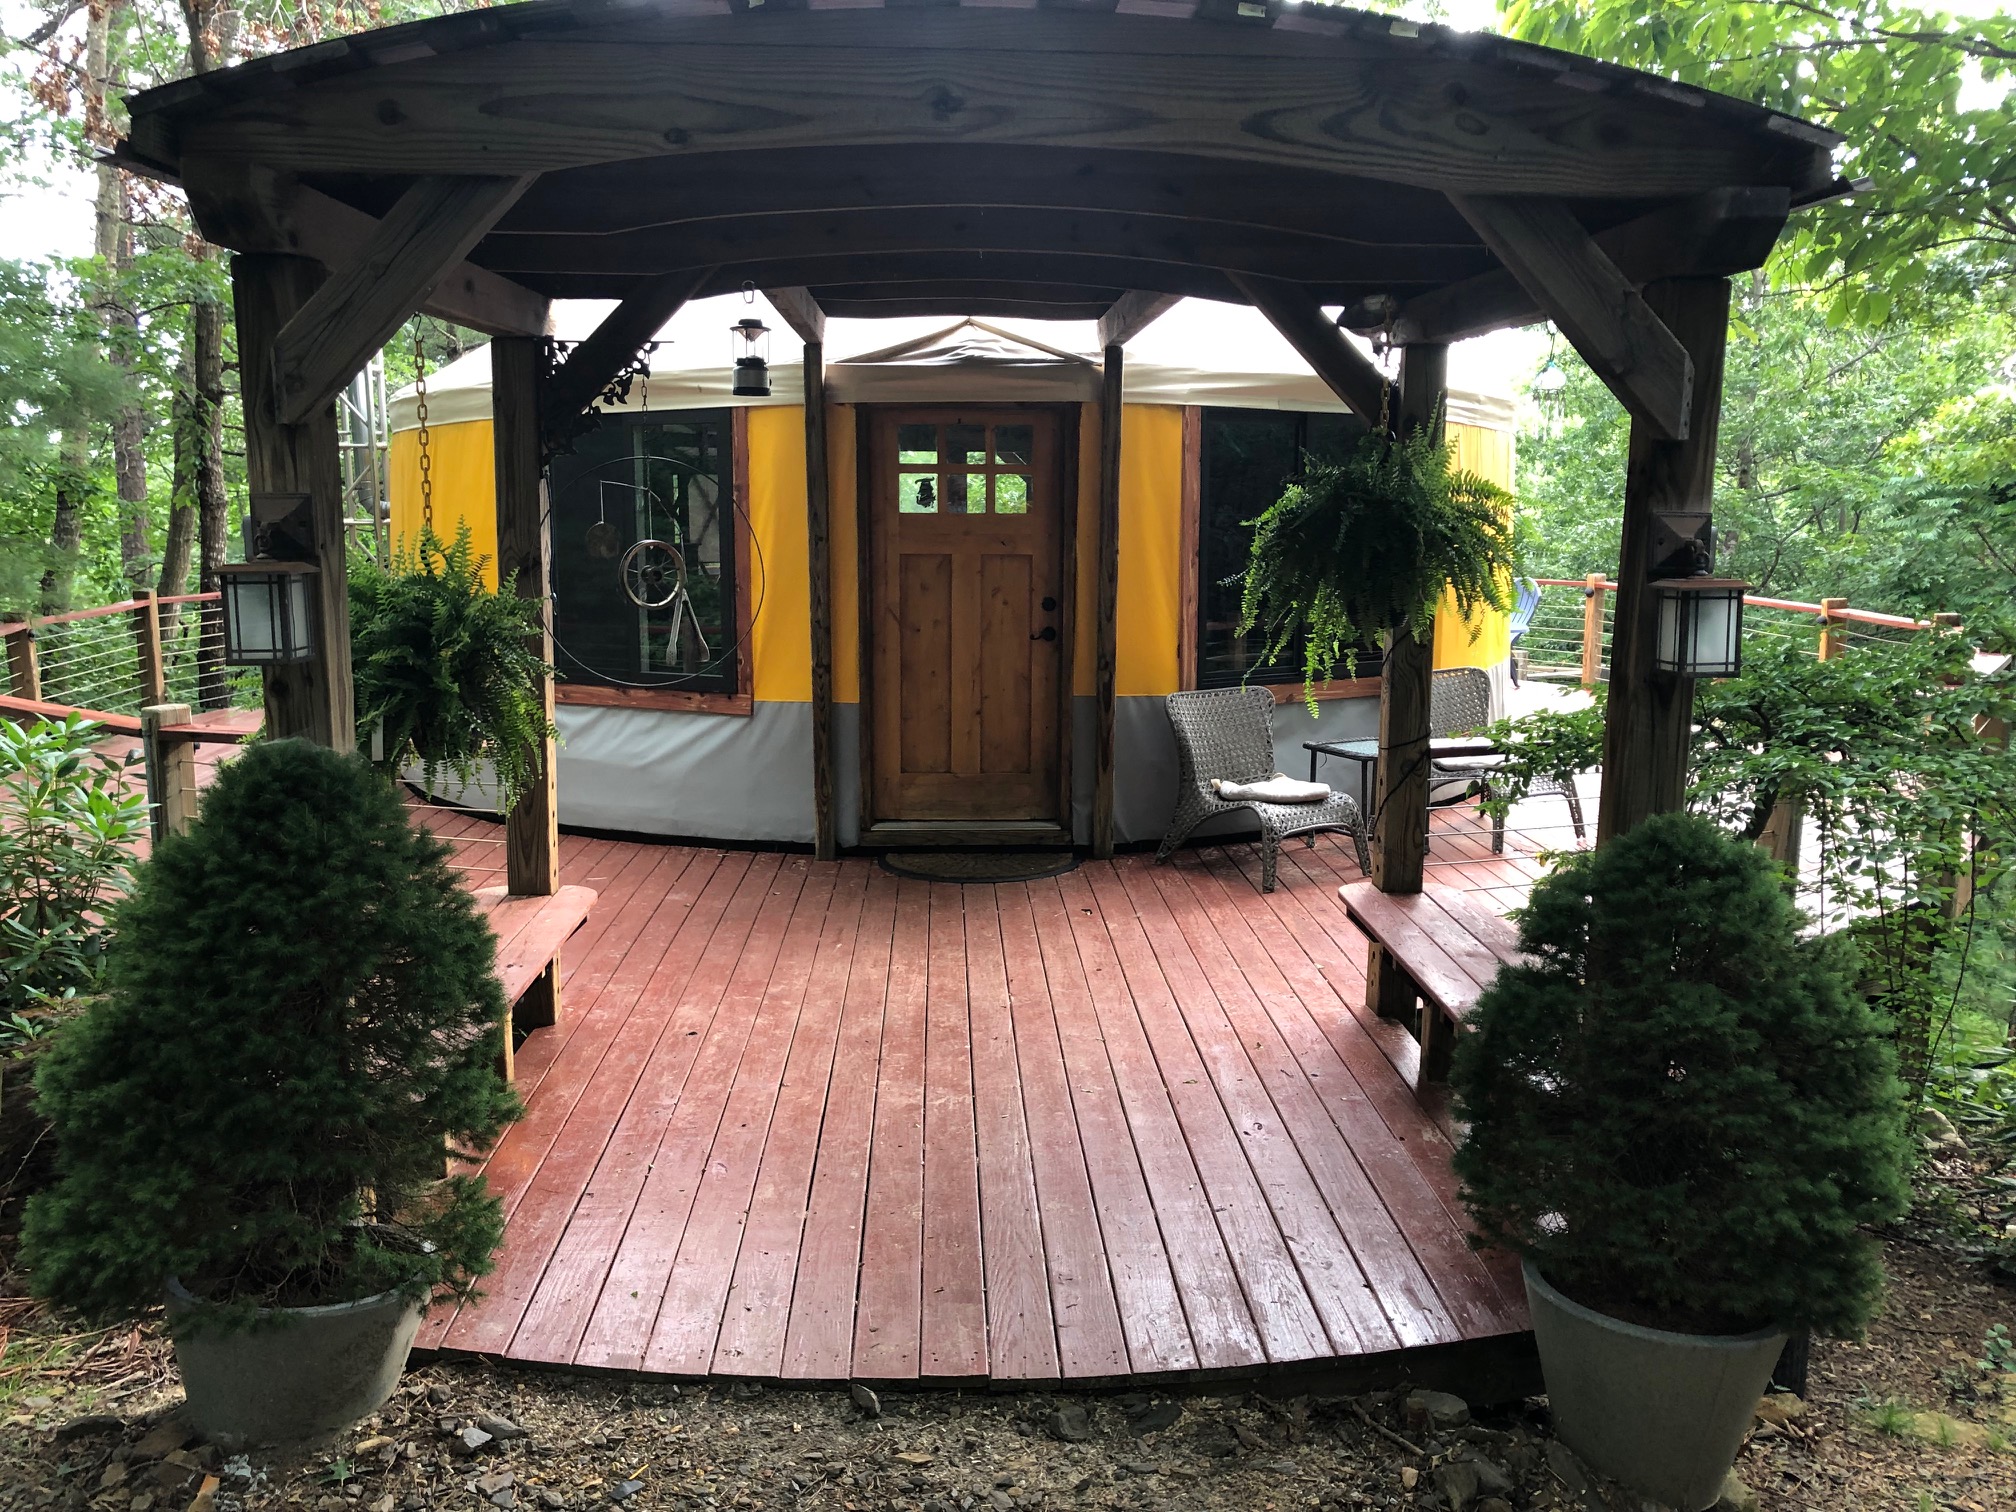 Inviting entry into 24ft yurt